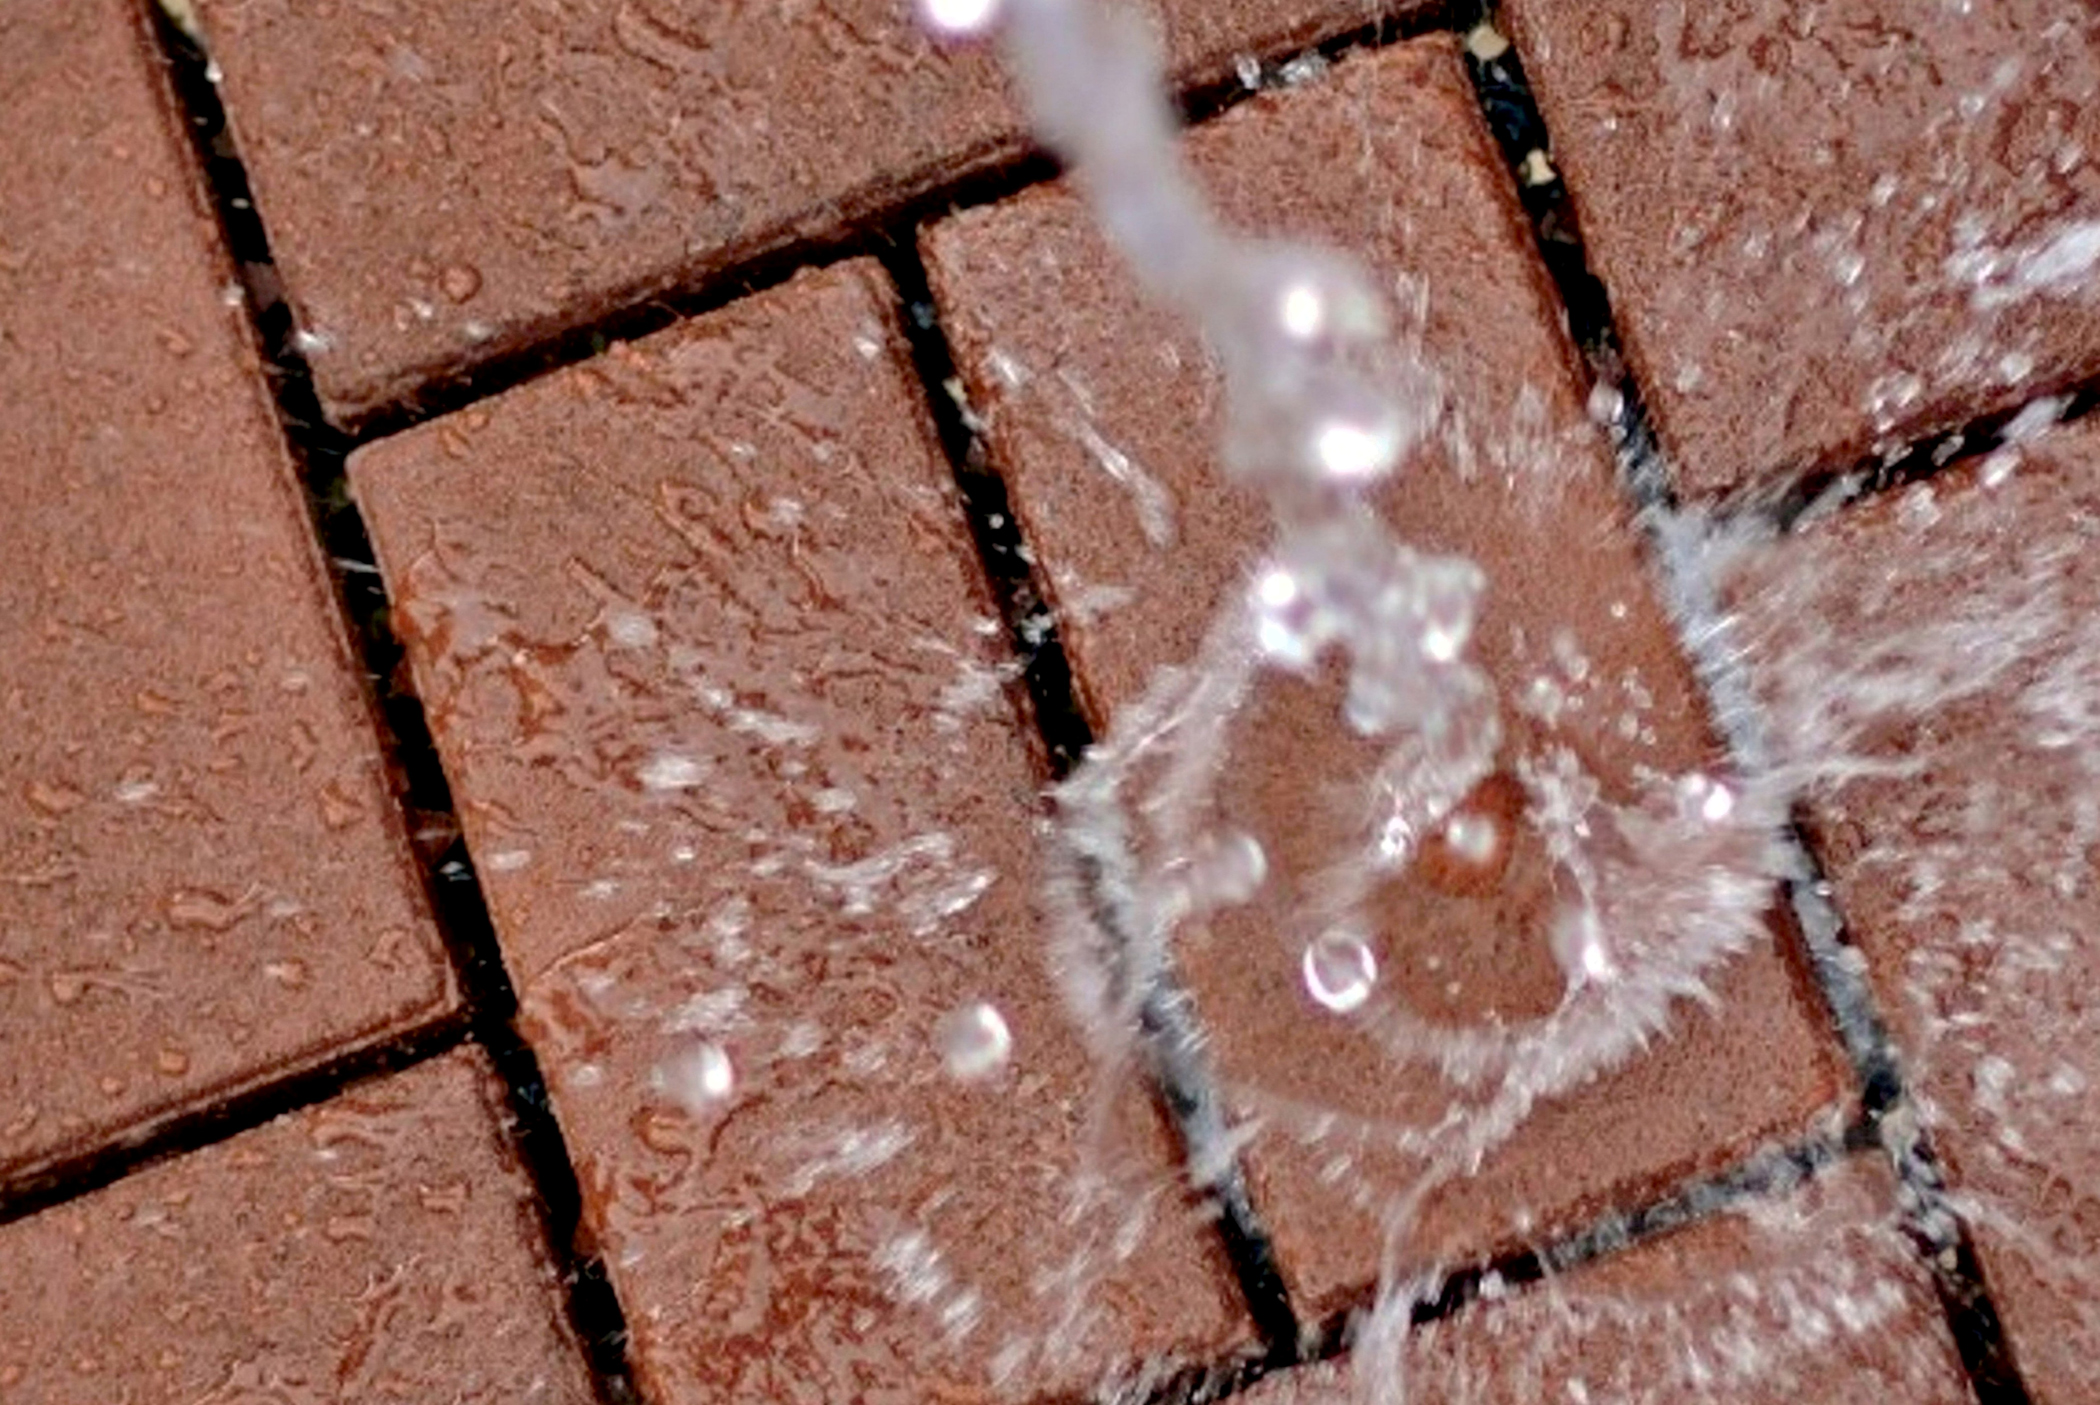 AZEK Pavers in Permeable style can help reduce storm water runoff.